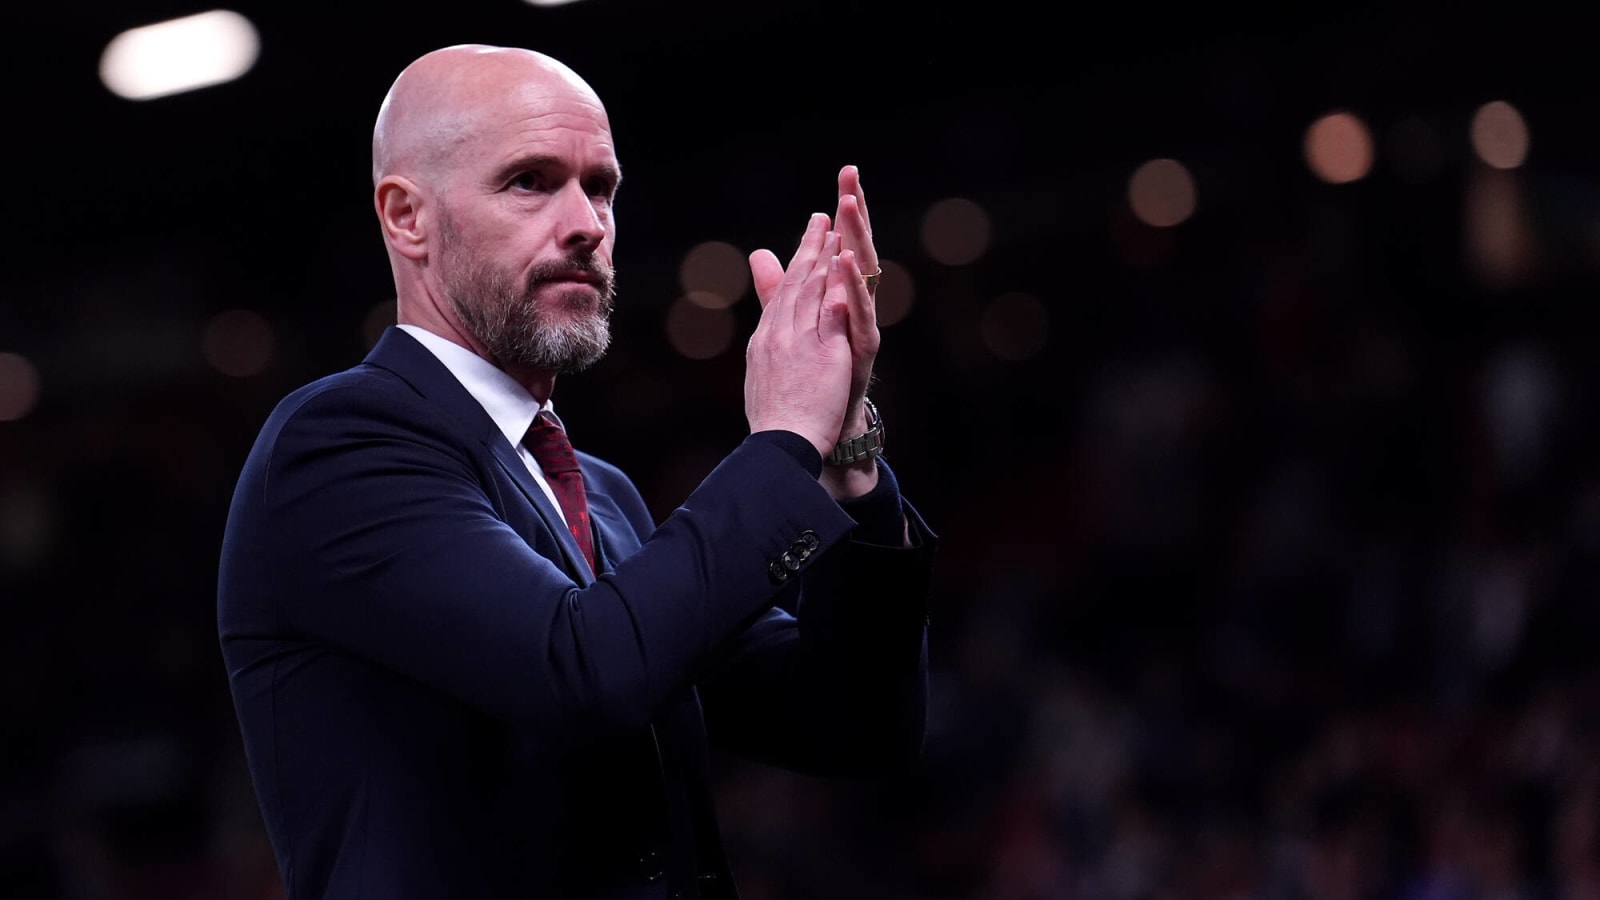 Ten Hag hails ‘best supporters in the world’ in rallying message to the Old Trafford faithful post-match